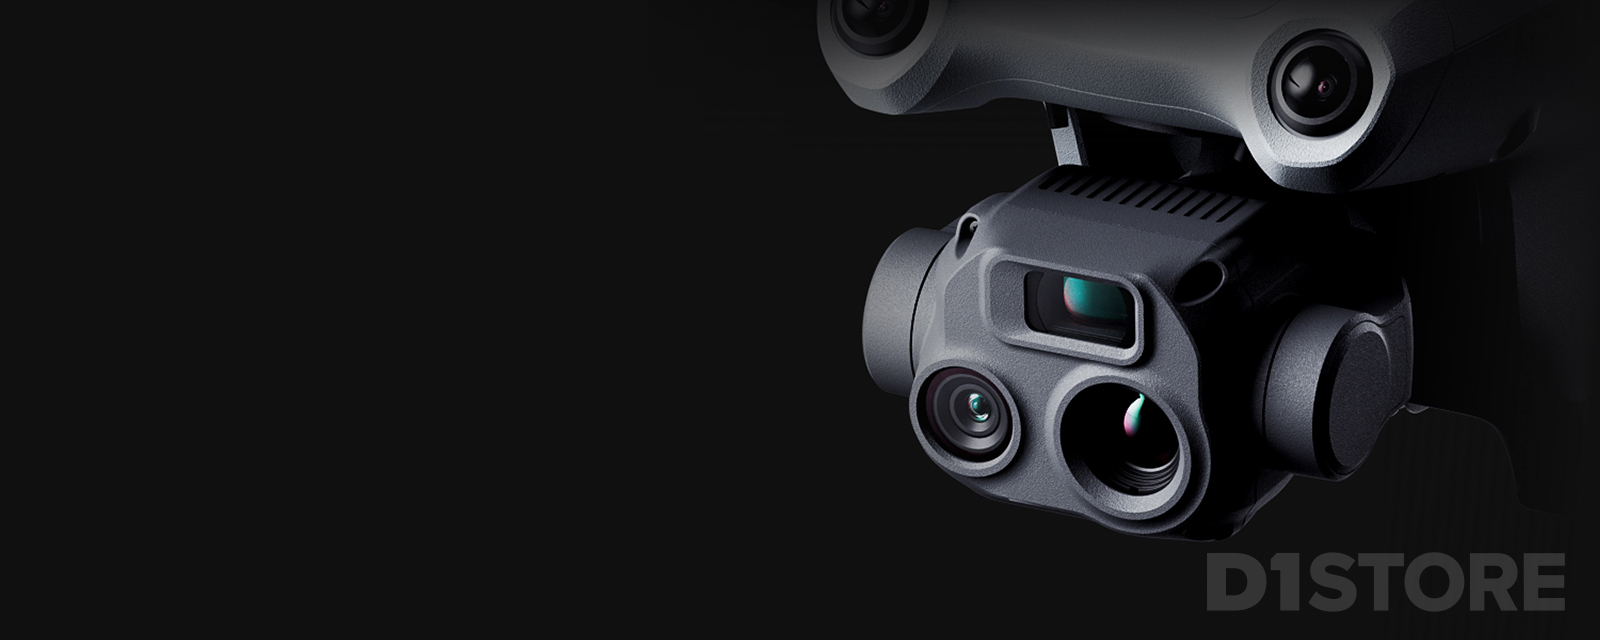 Close up image of the Matrice 3D drone camera